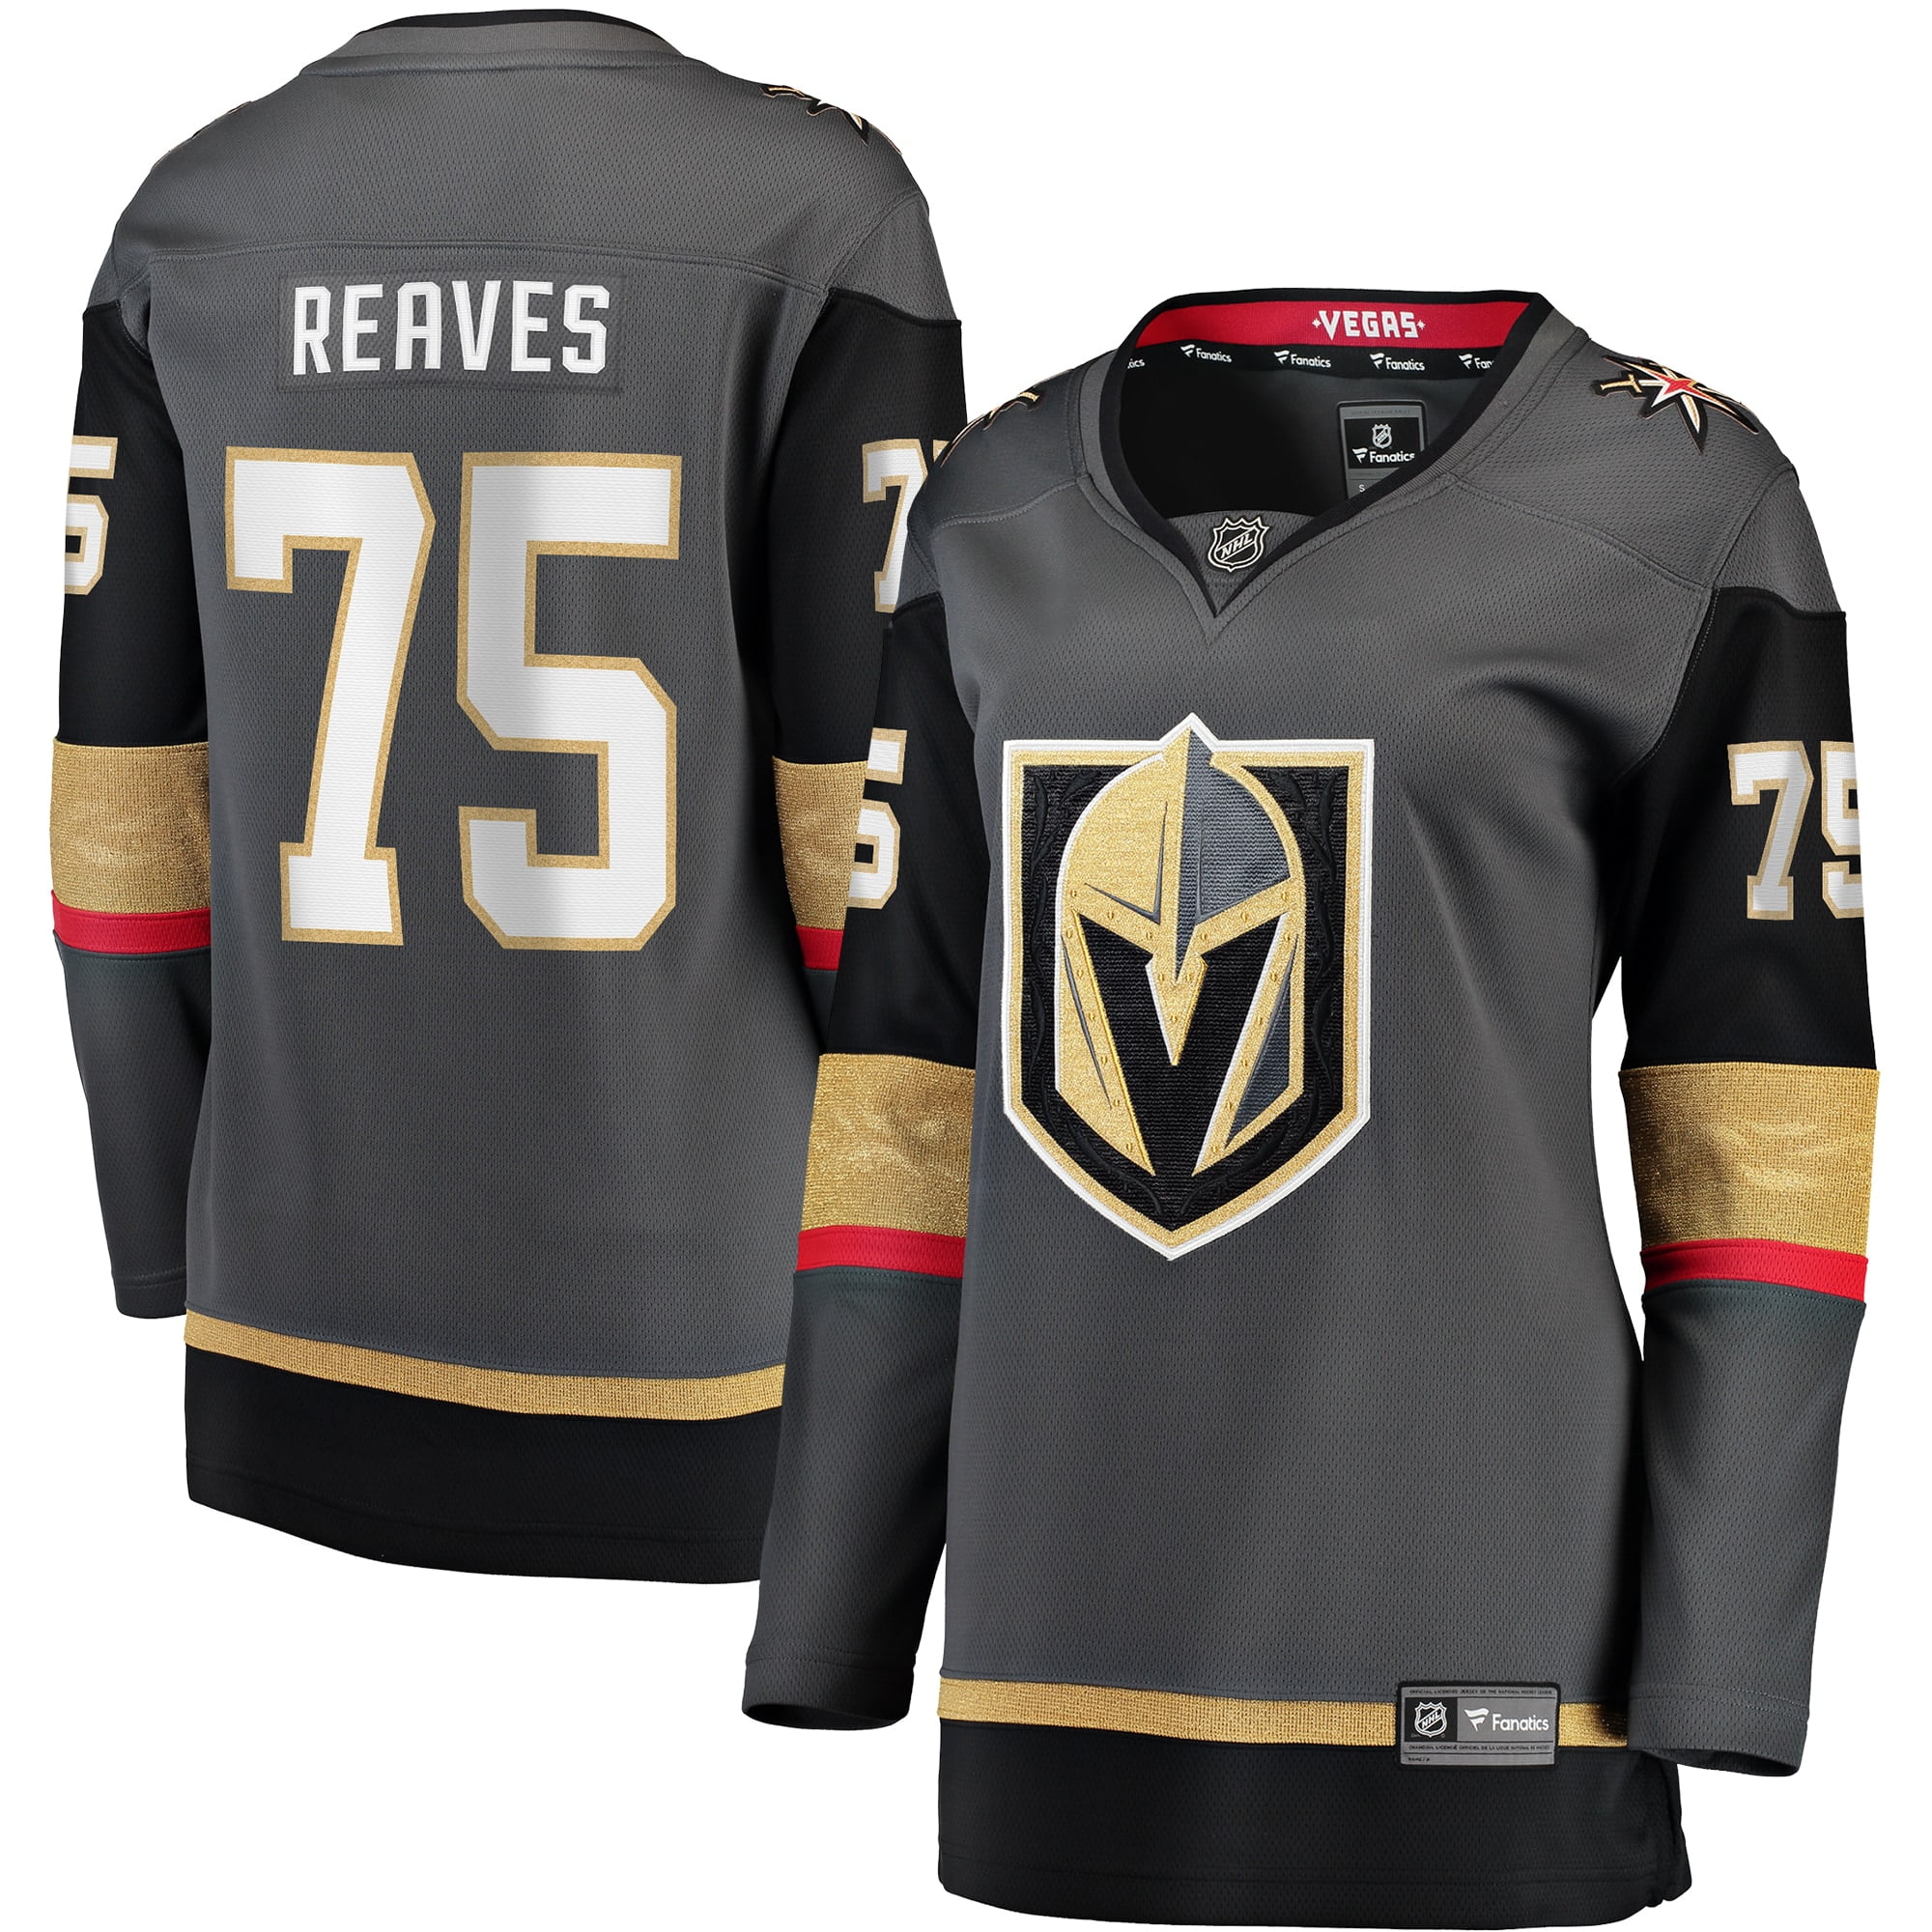 the golden knights jersey